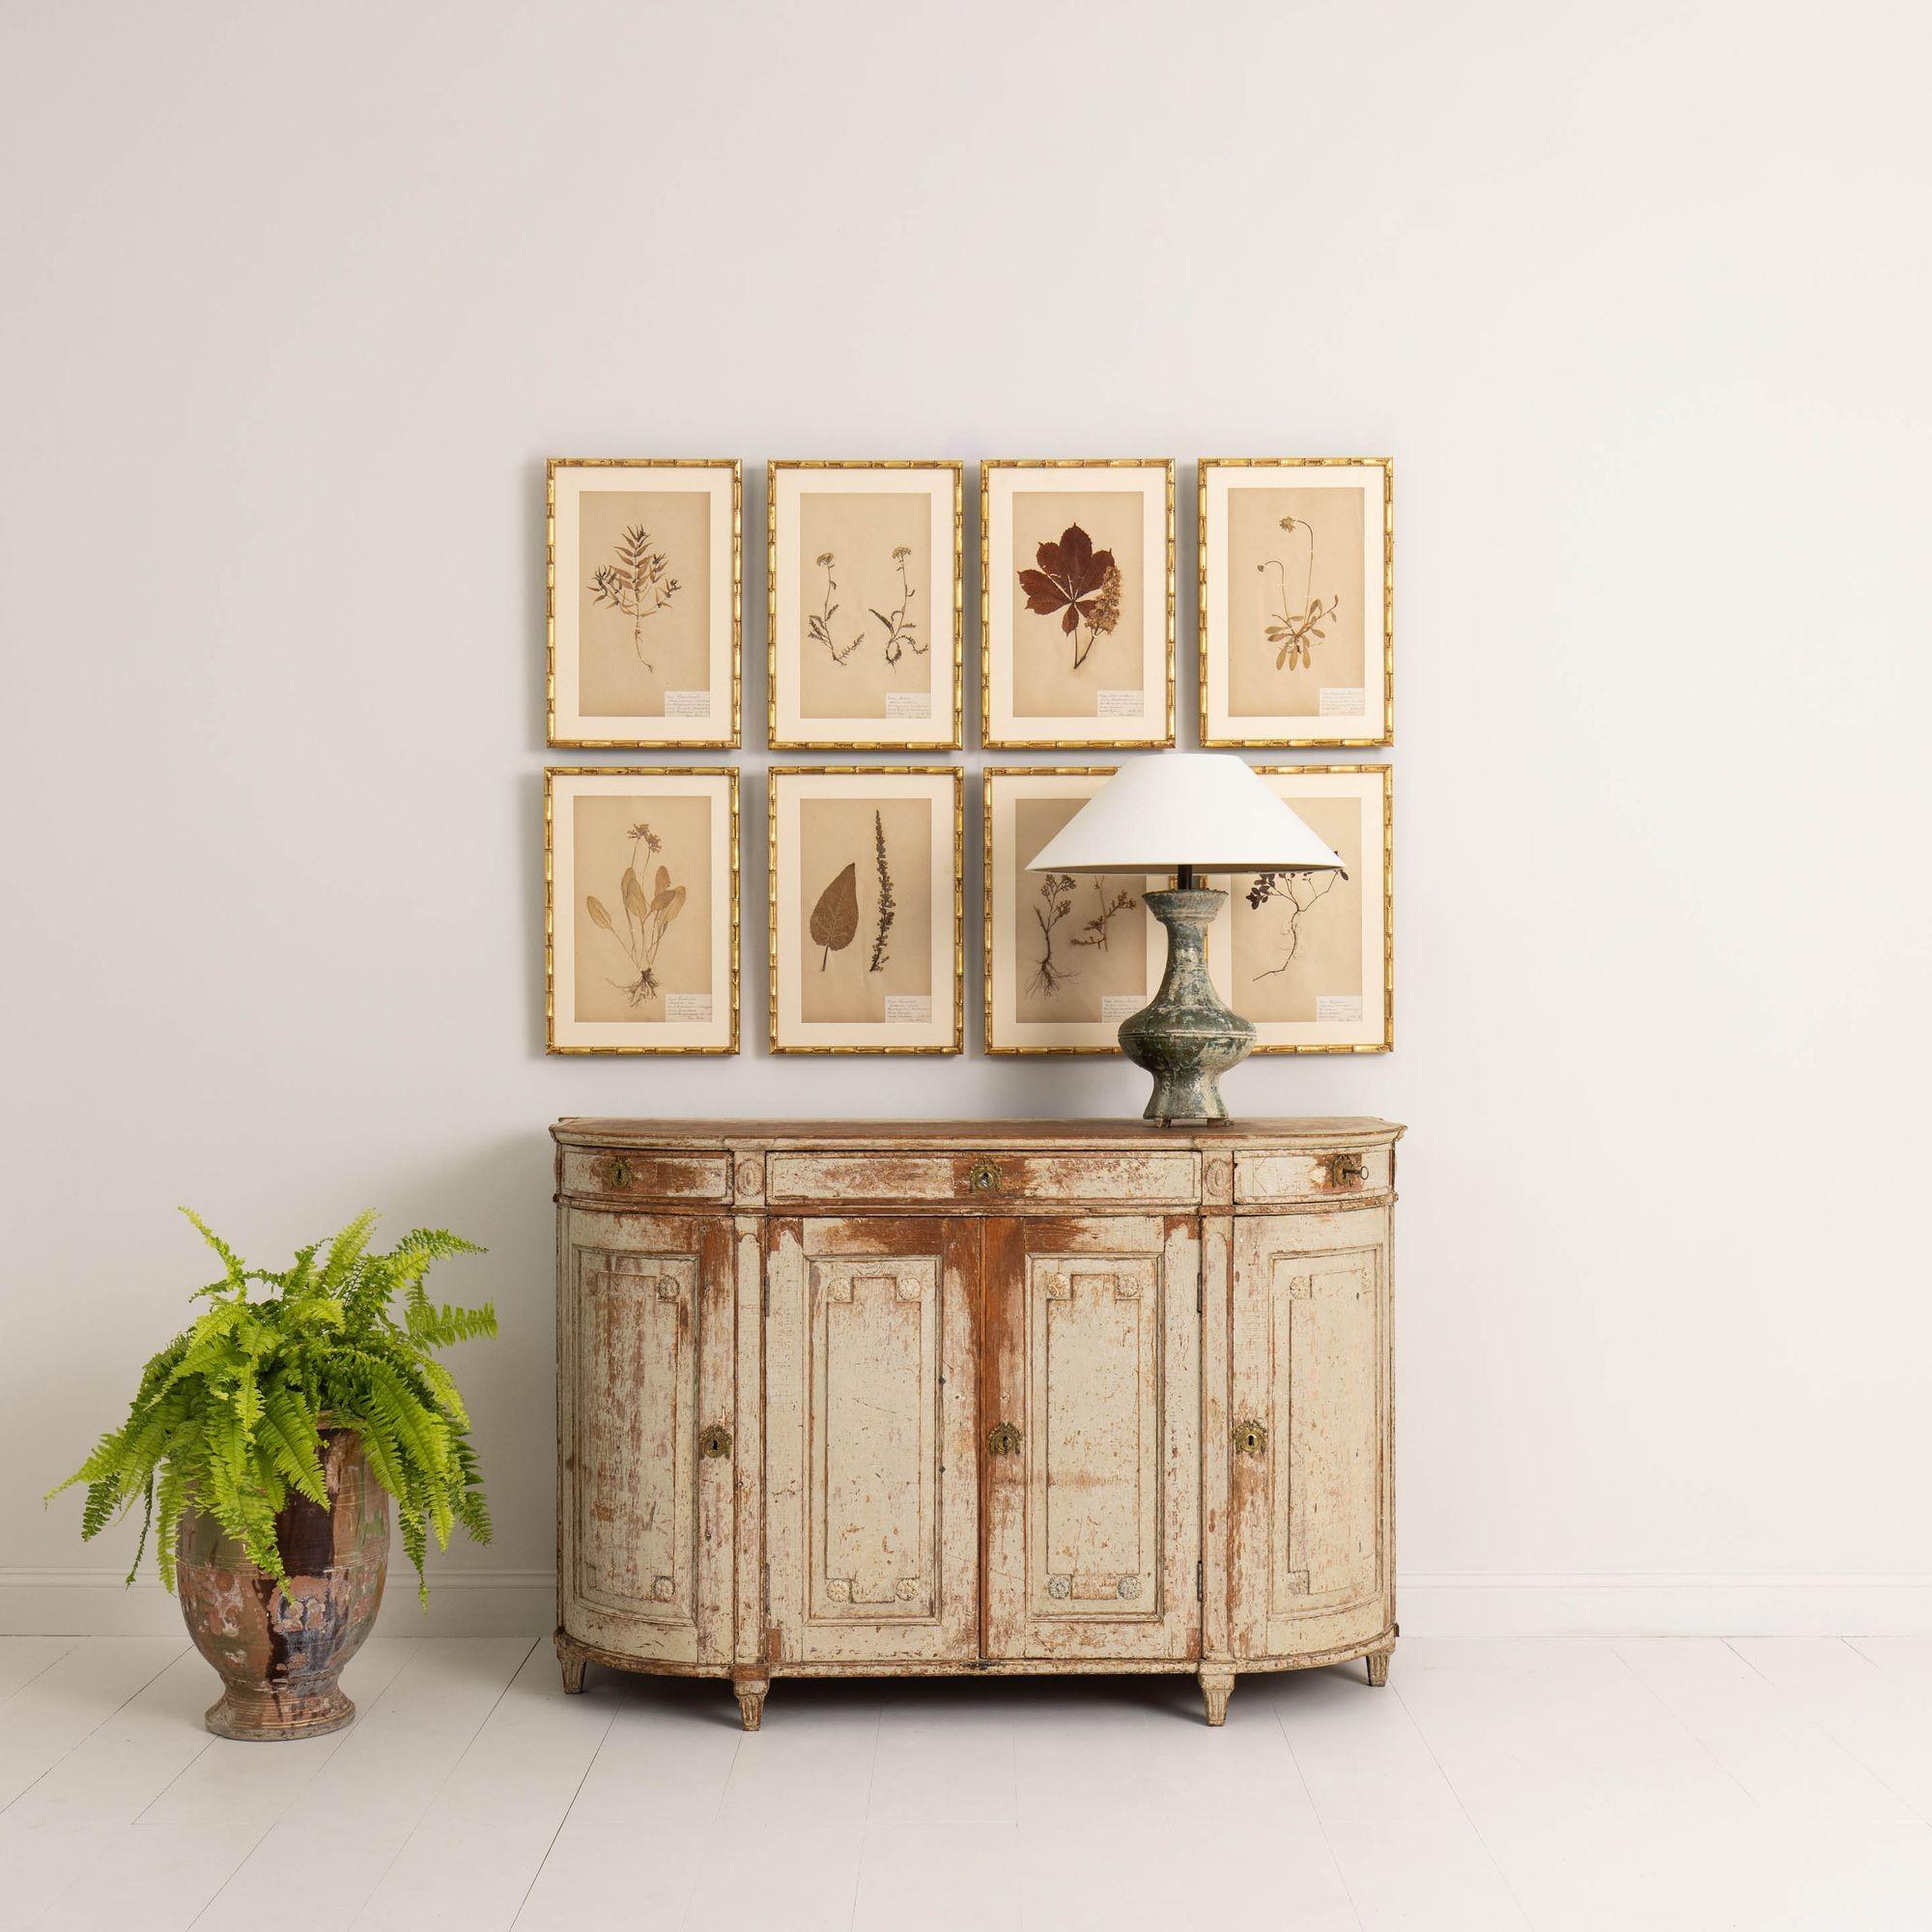 A rare Swedish buffet from the Gustavian period with demilune sides and original paint inside and outside, circa 1780. This special piece came from a manor house in Uppland, Sweden. There are four working drawers and raised panel doors that feature